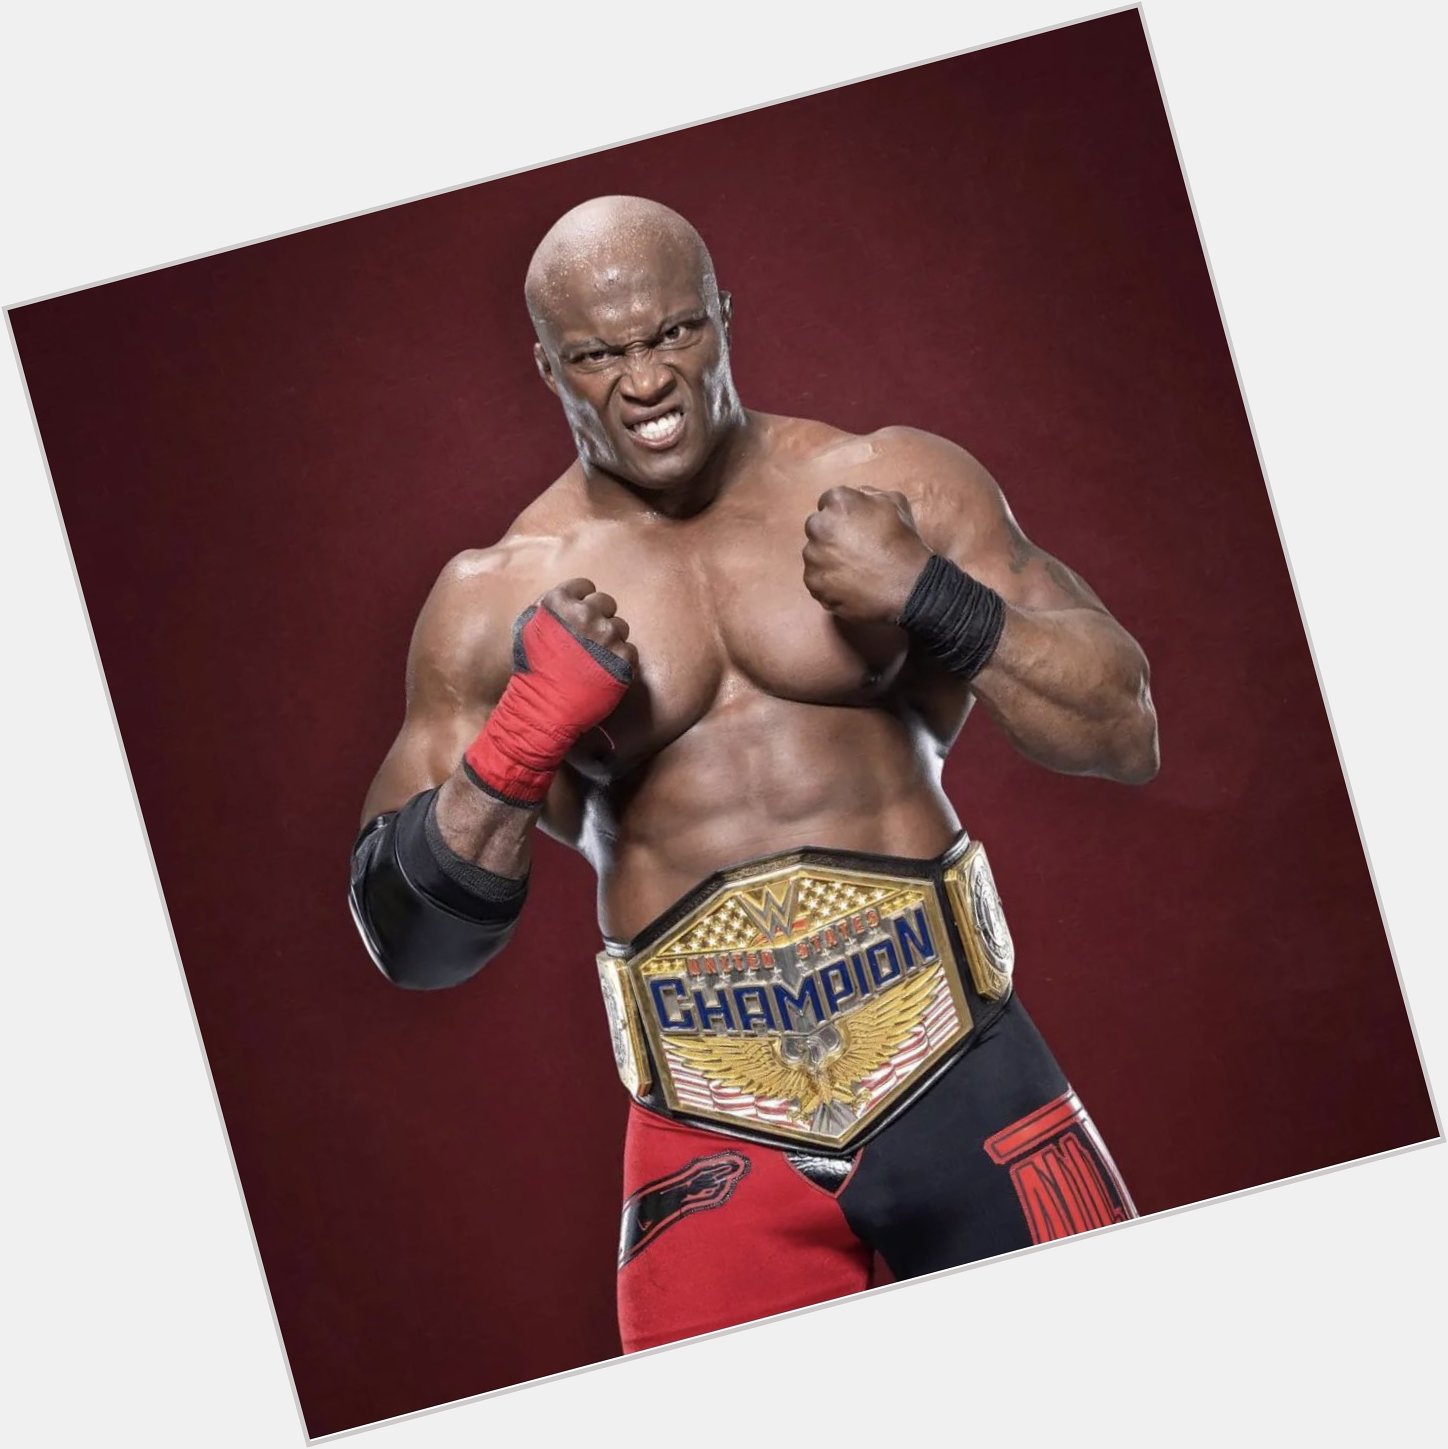 Happy Birthday to The Almighty Bobby Lashley looking good for 46 And hopefully will be World champion again soon 